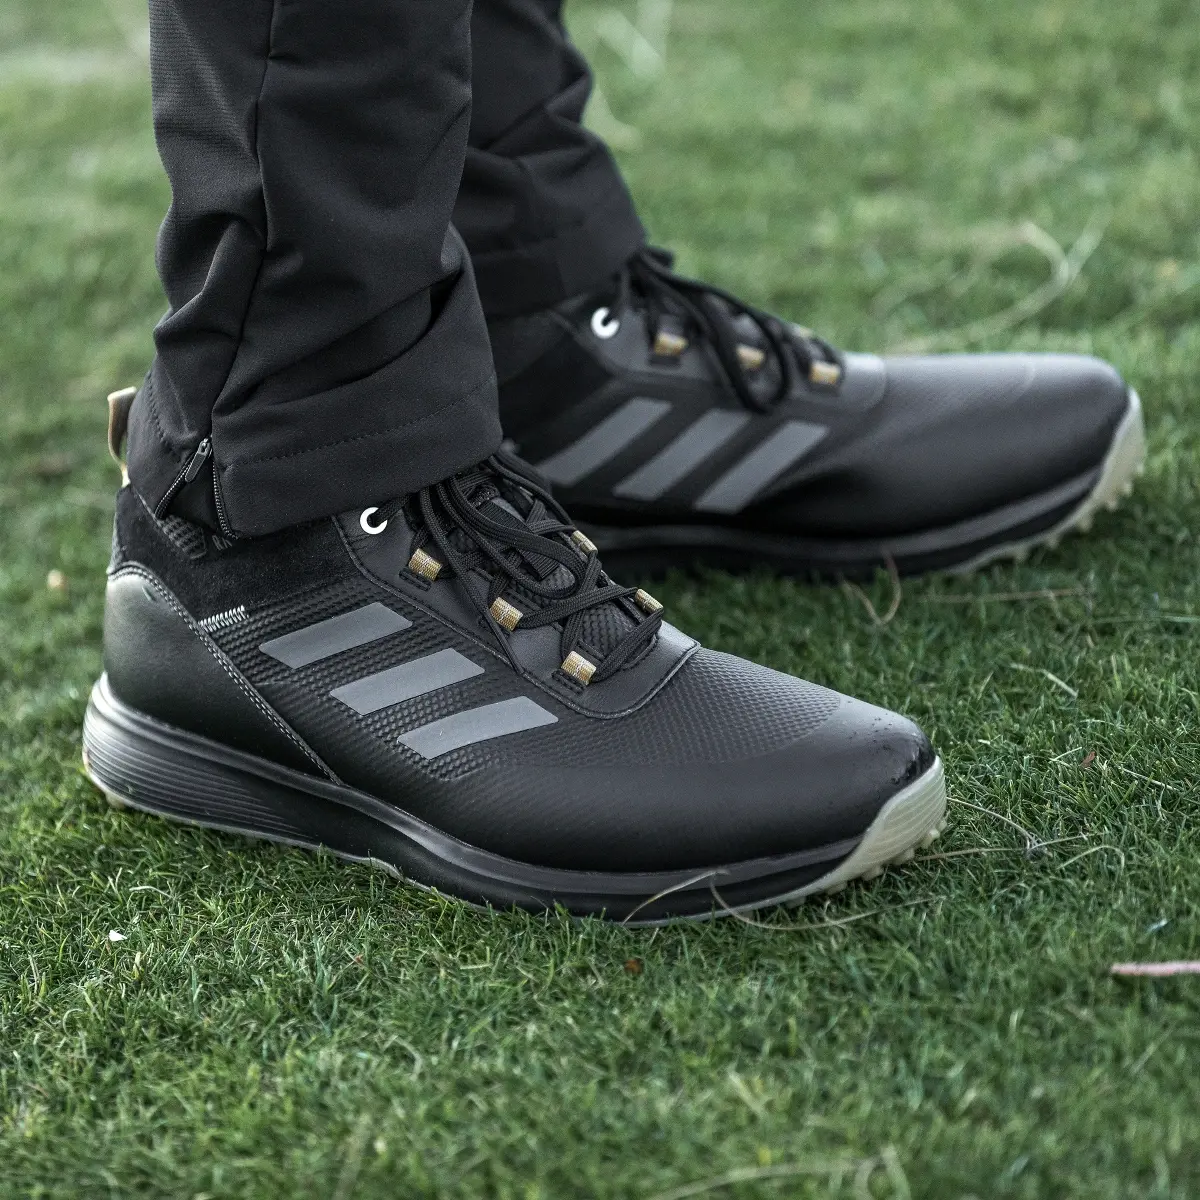 Adidas S2G Recycled Polyester Mid-Cut Golf Shoes. 3